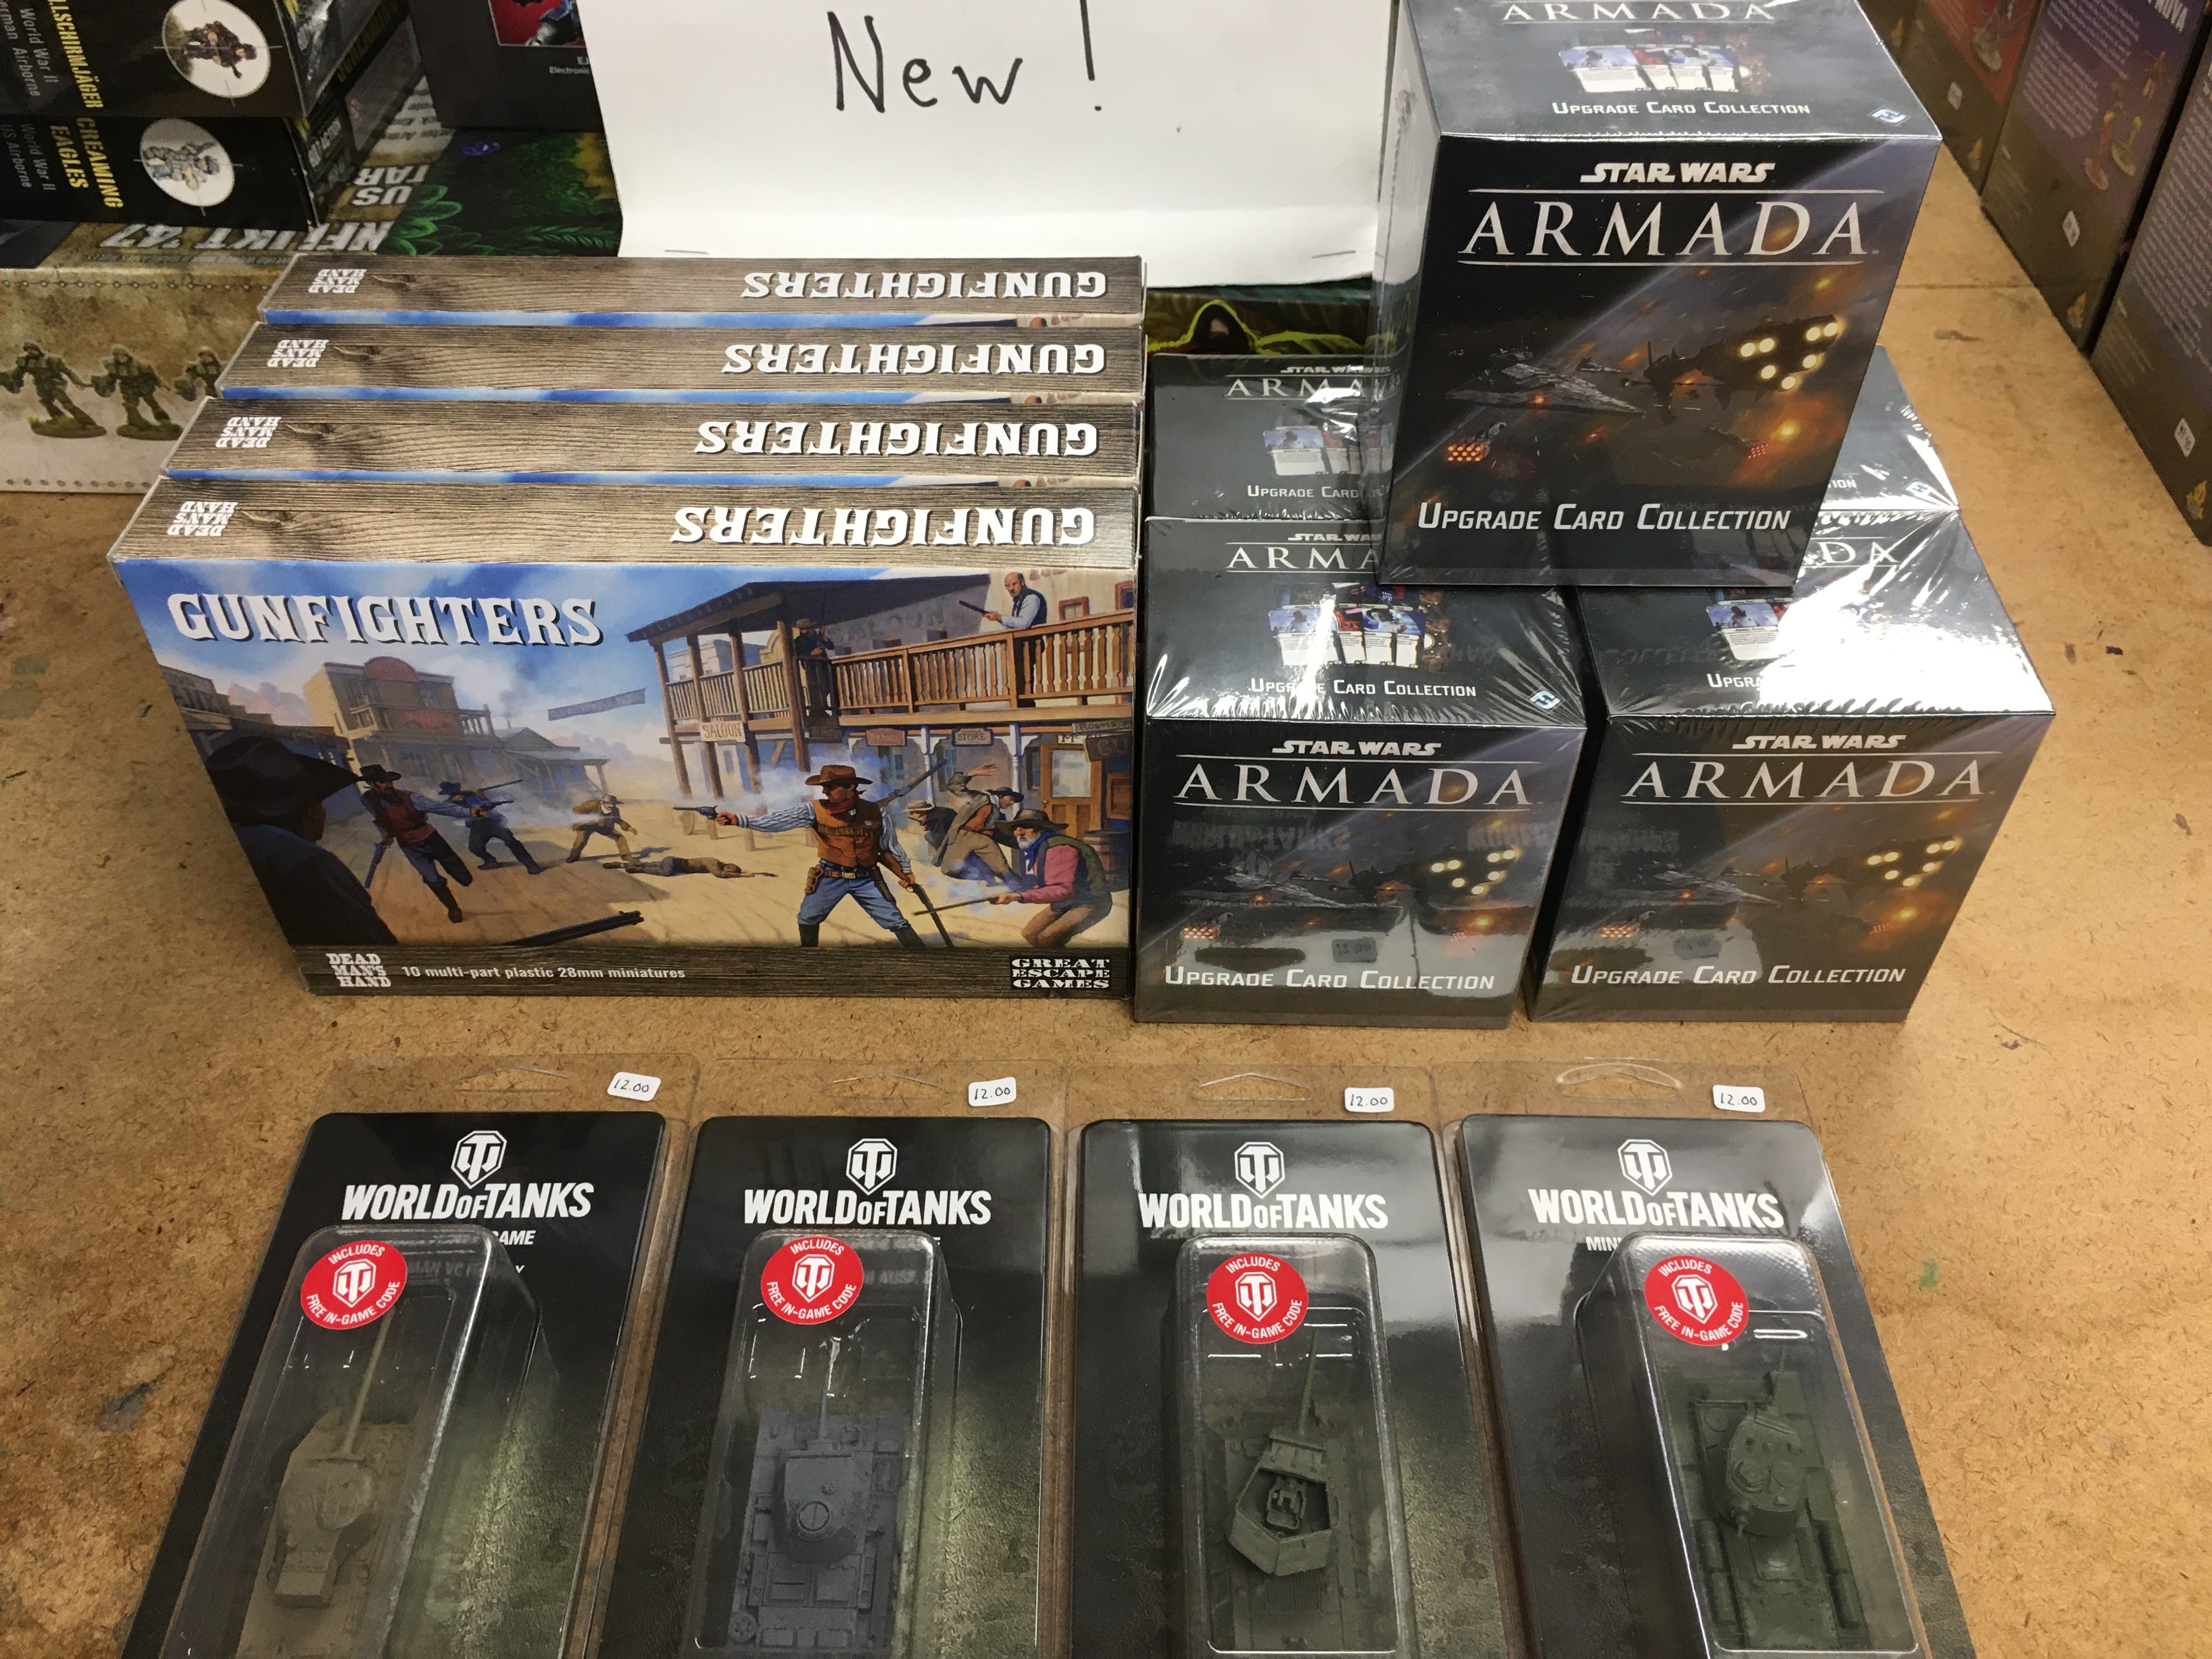 Armada Upgrade Cards, Plastic Gun Fighters, and World of Tanks!